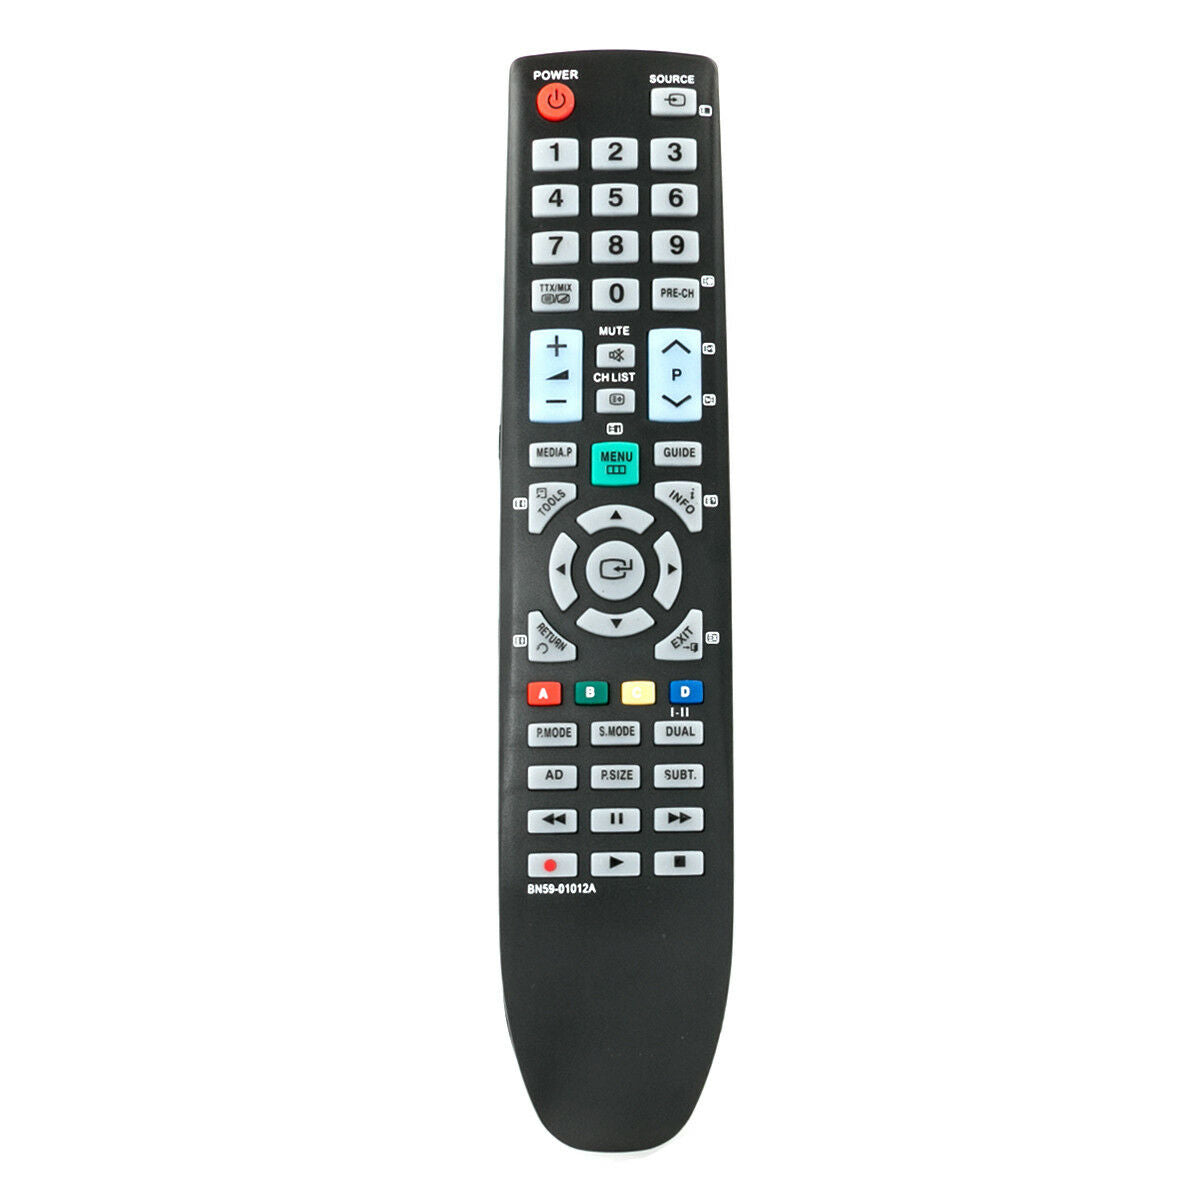 BN59-01012A Replacement Remote Control for Samsung LE26C450 LE32C450 PS42C450